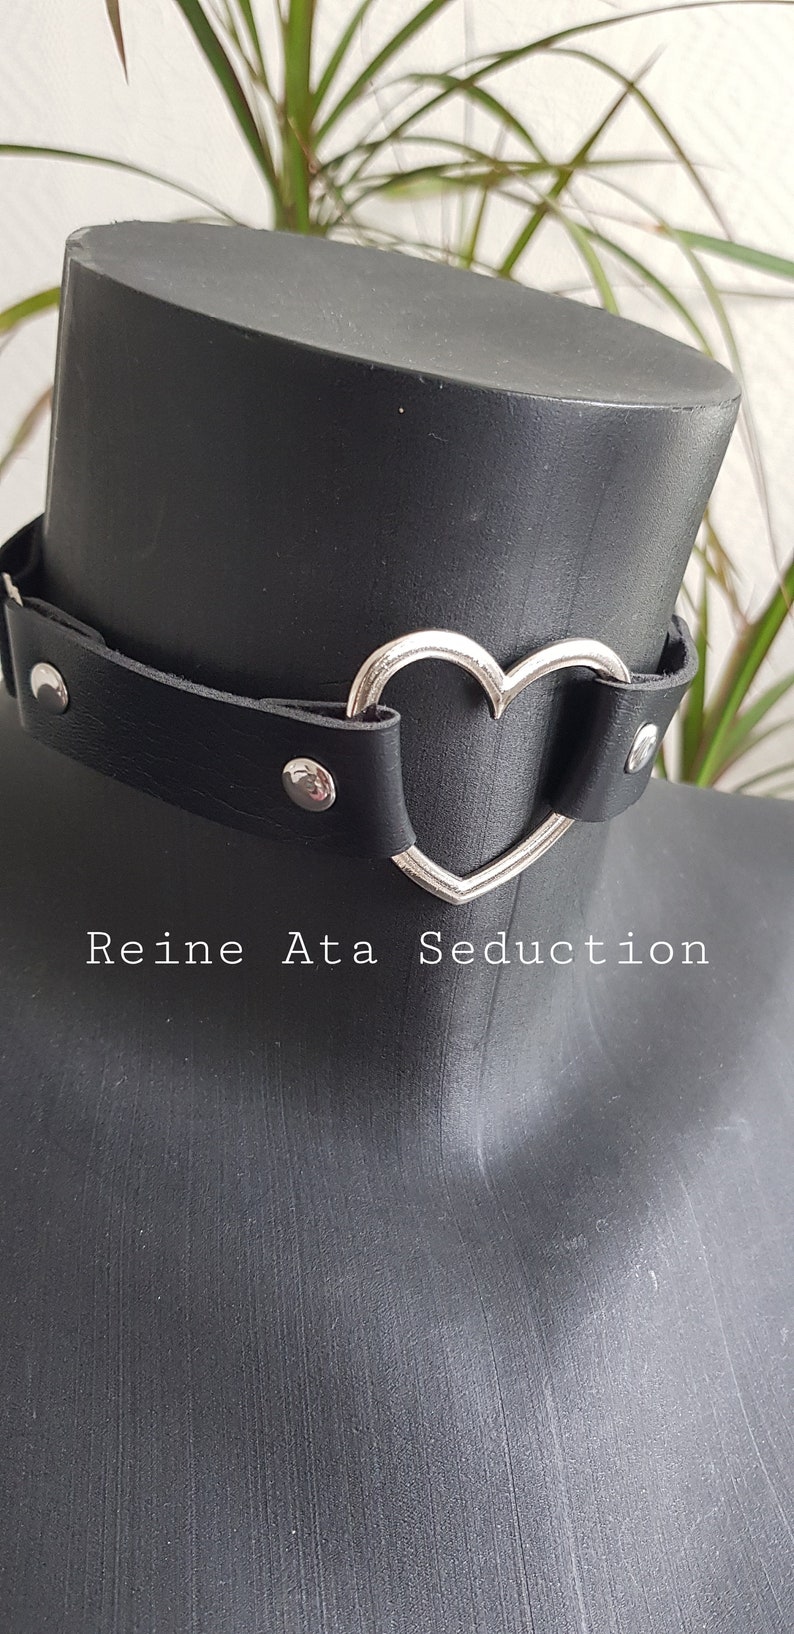 Choker, choker necklace, neck harness, thigh harness, leather thigh ring garter image 2